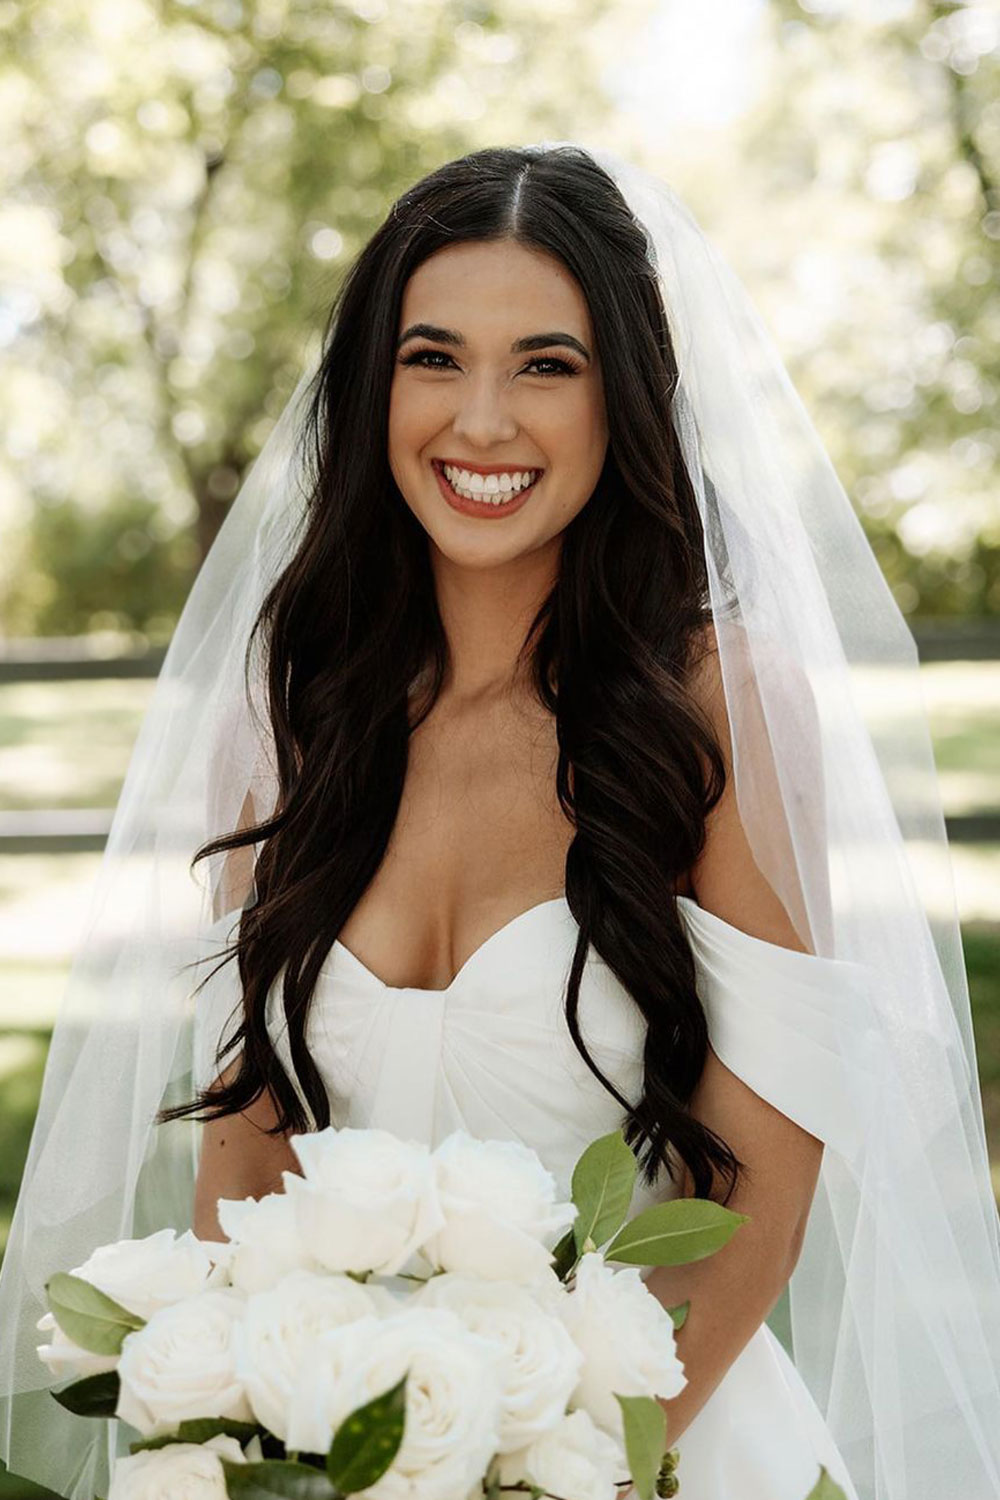 Veil with Soft Curls on Long Hair